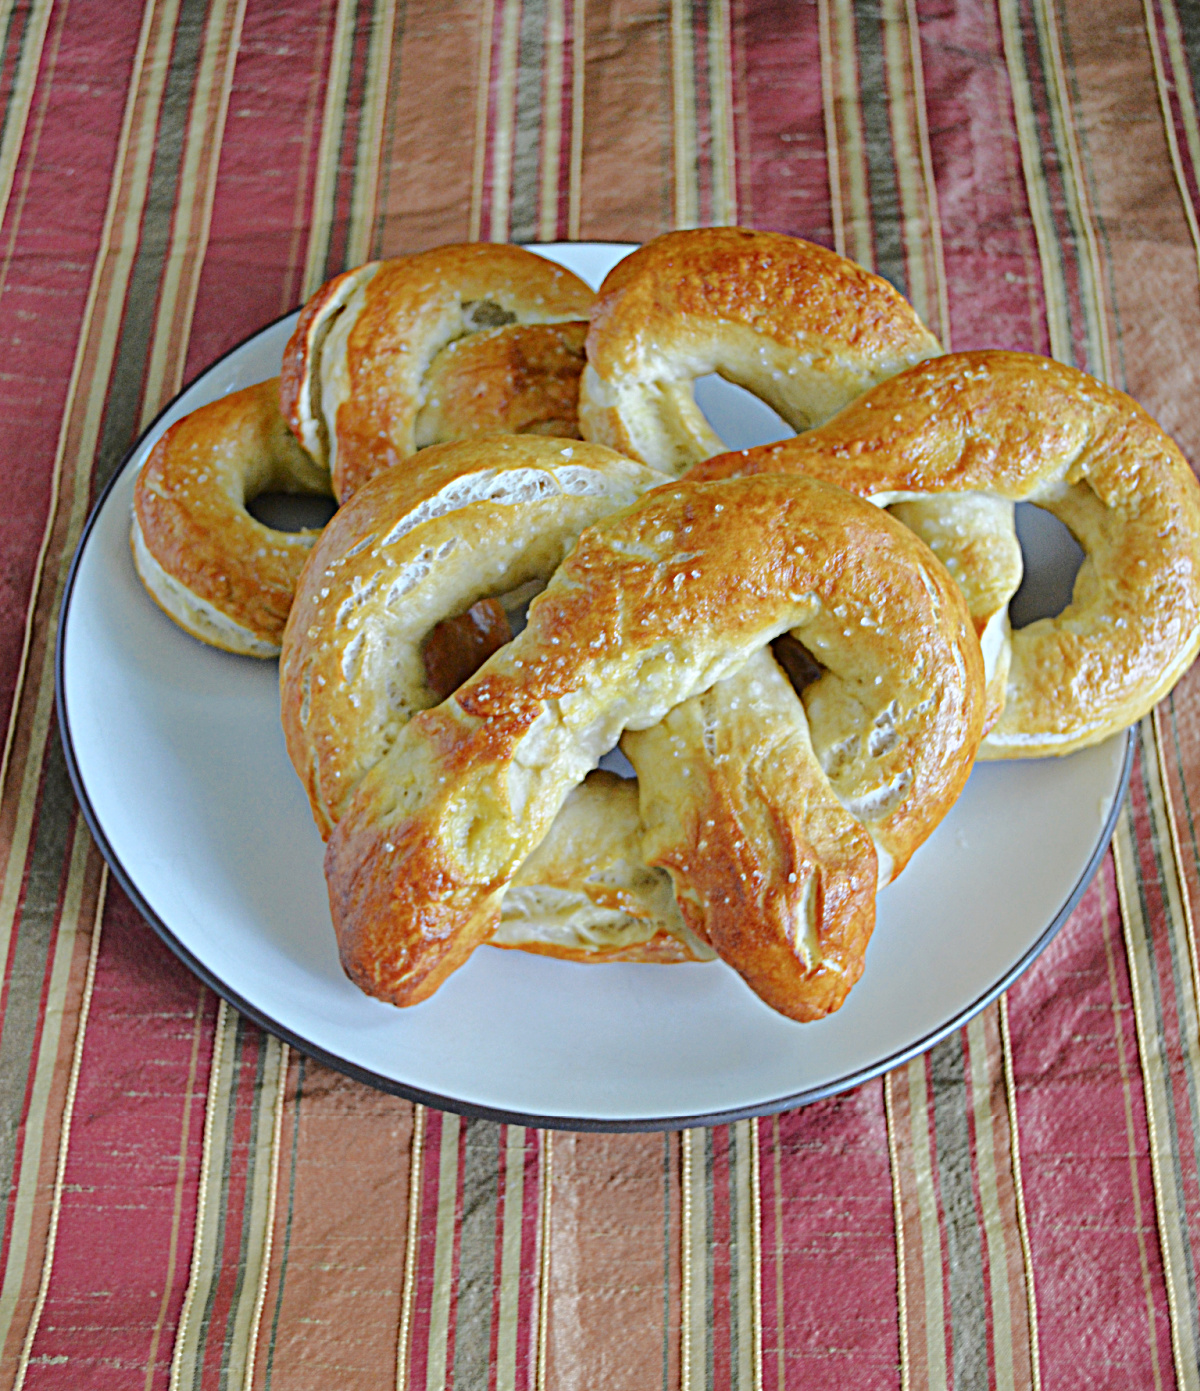 A plate with 3 large, golden brown pretzels on it.